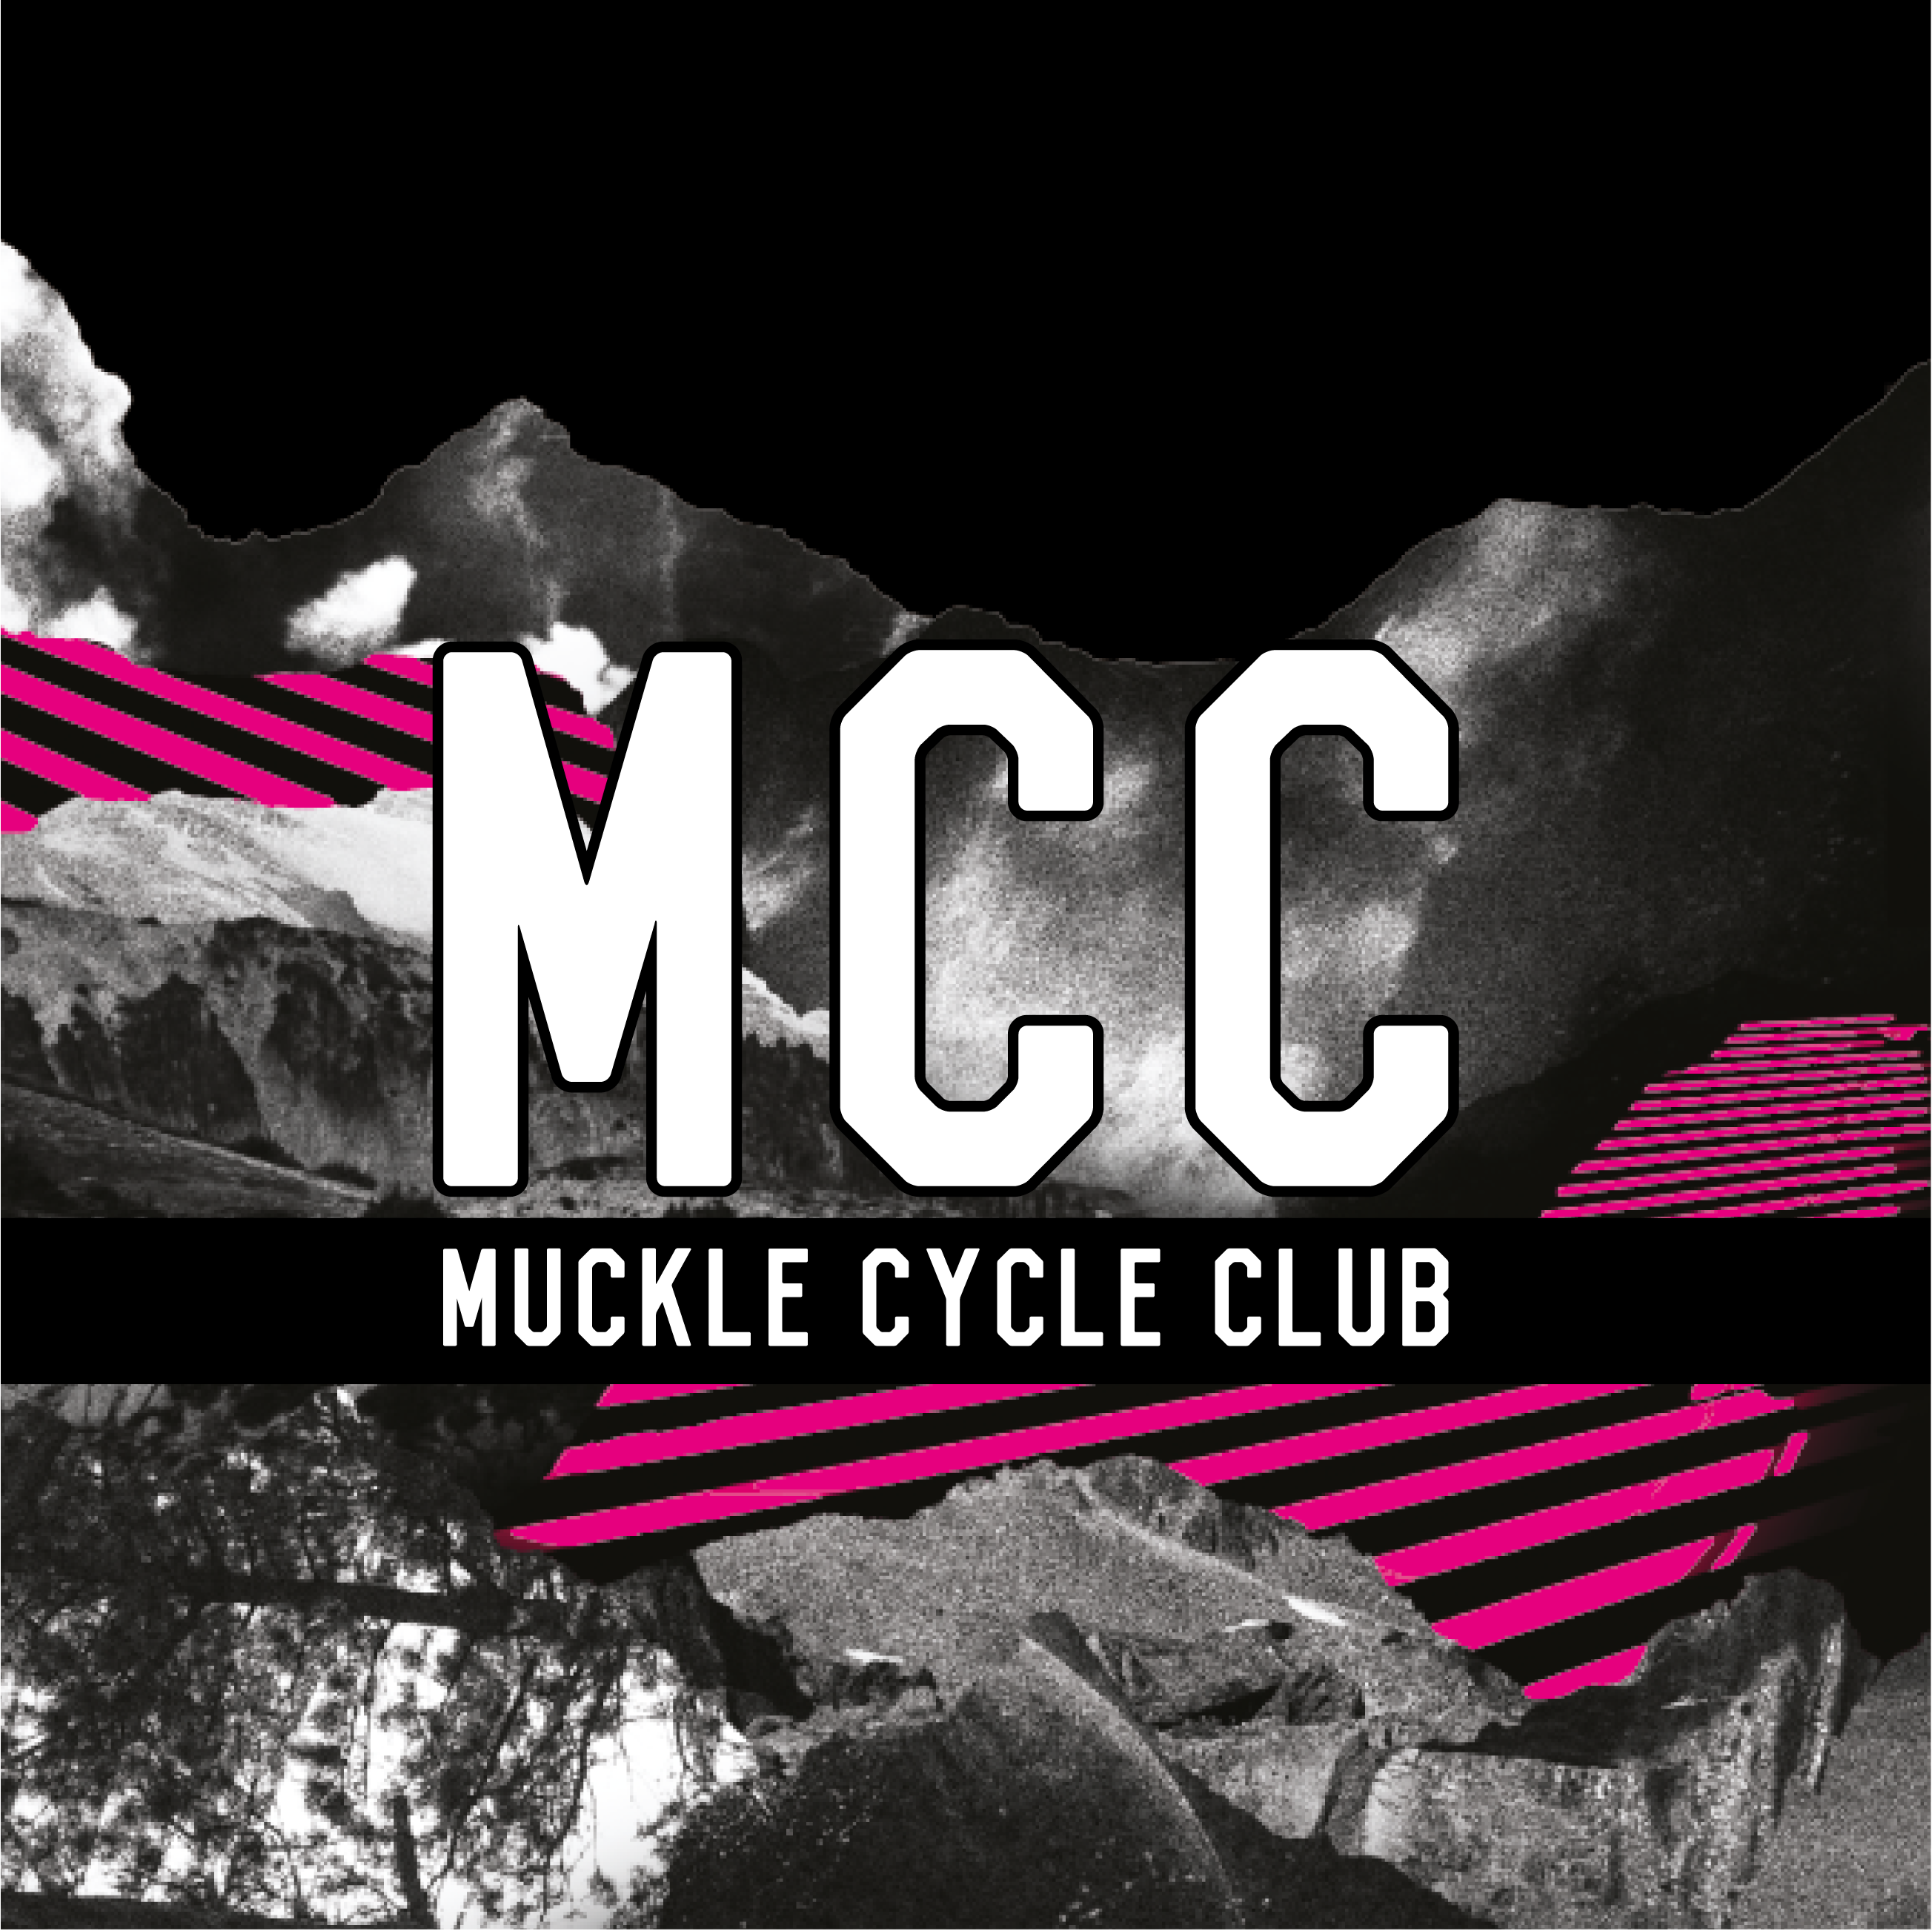 Club Image for MUCKLE CC